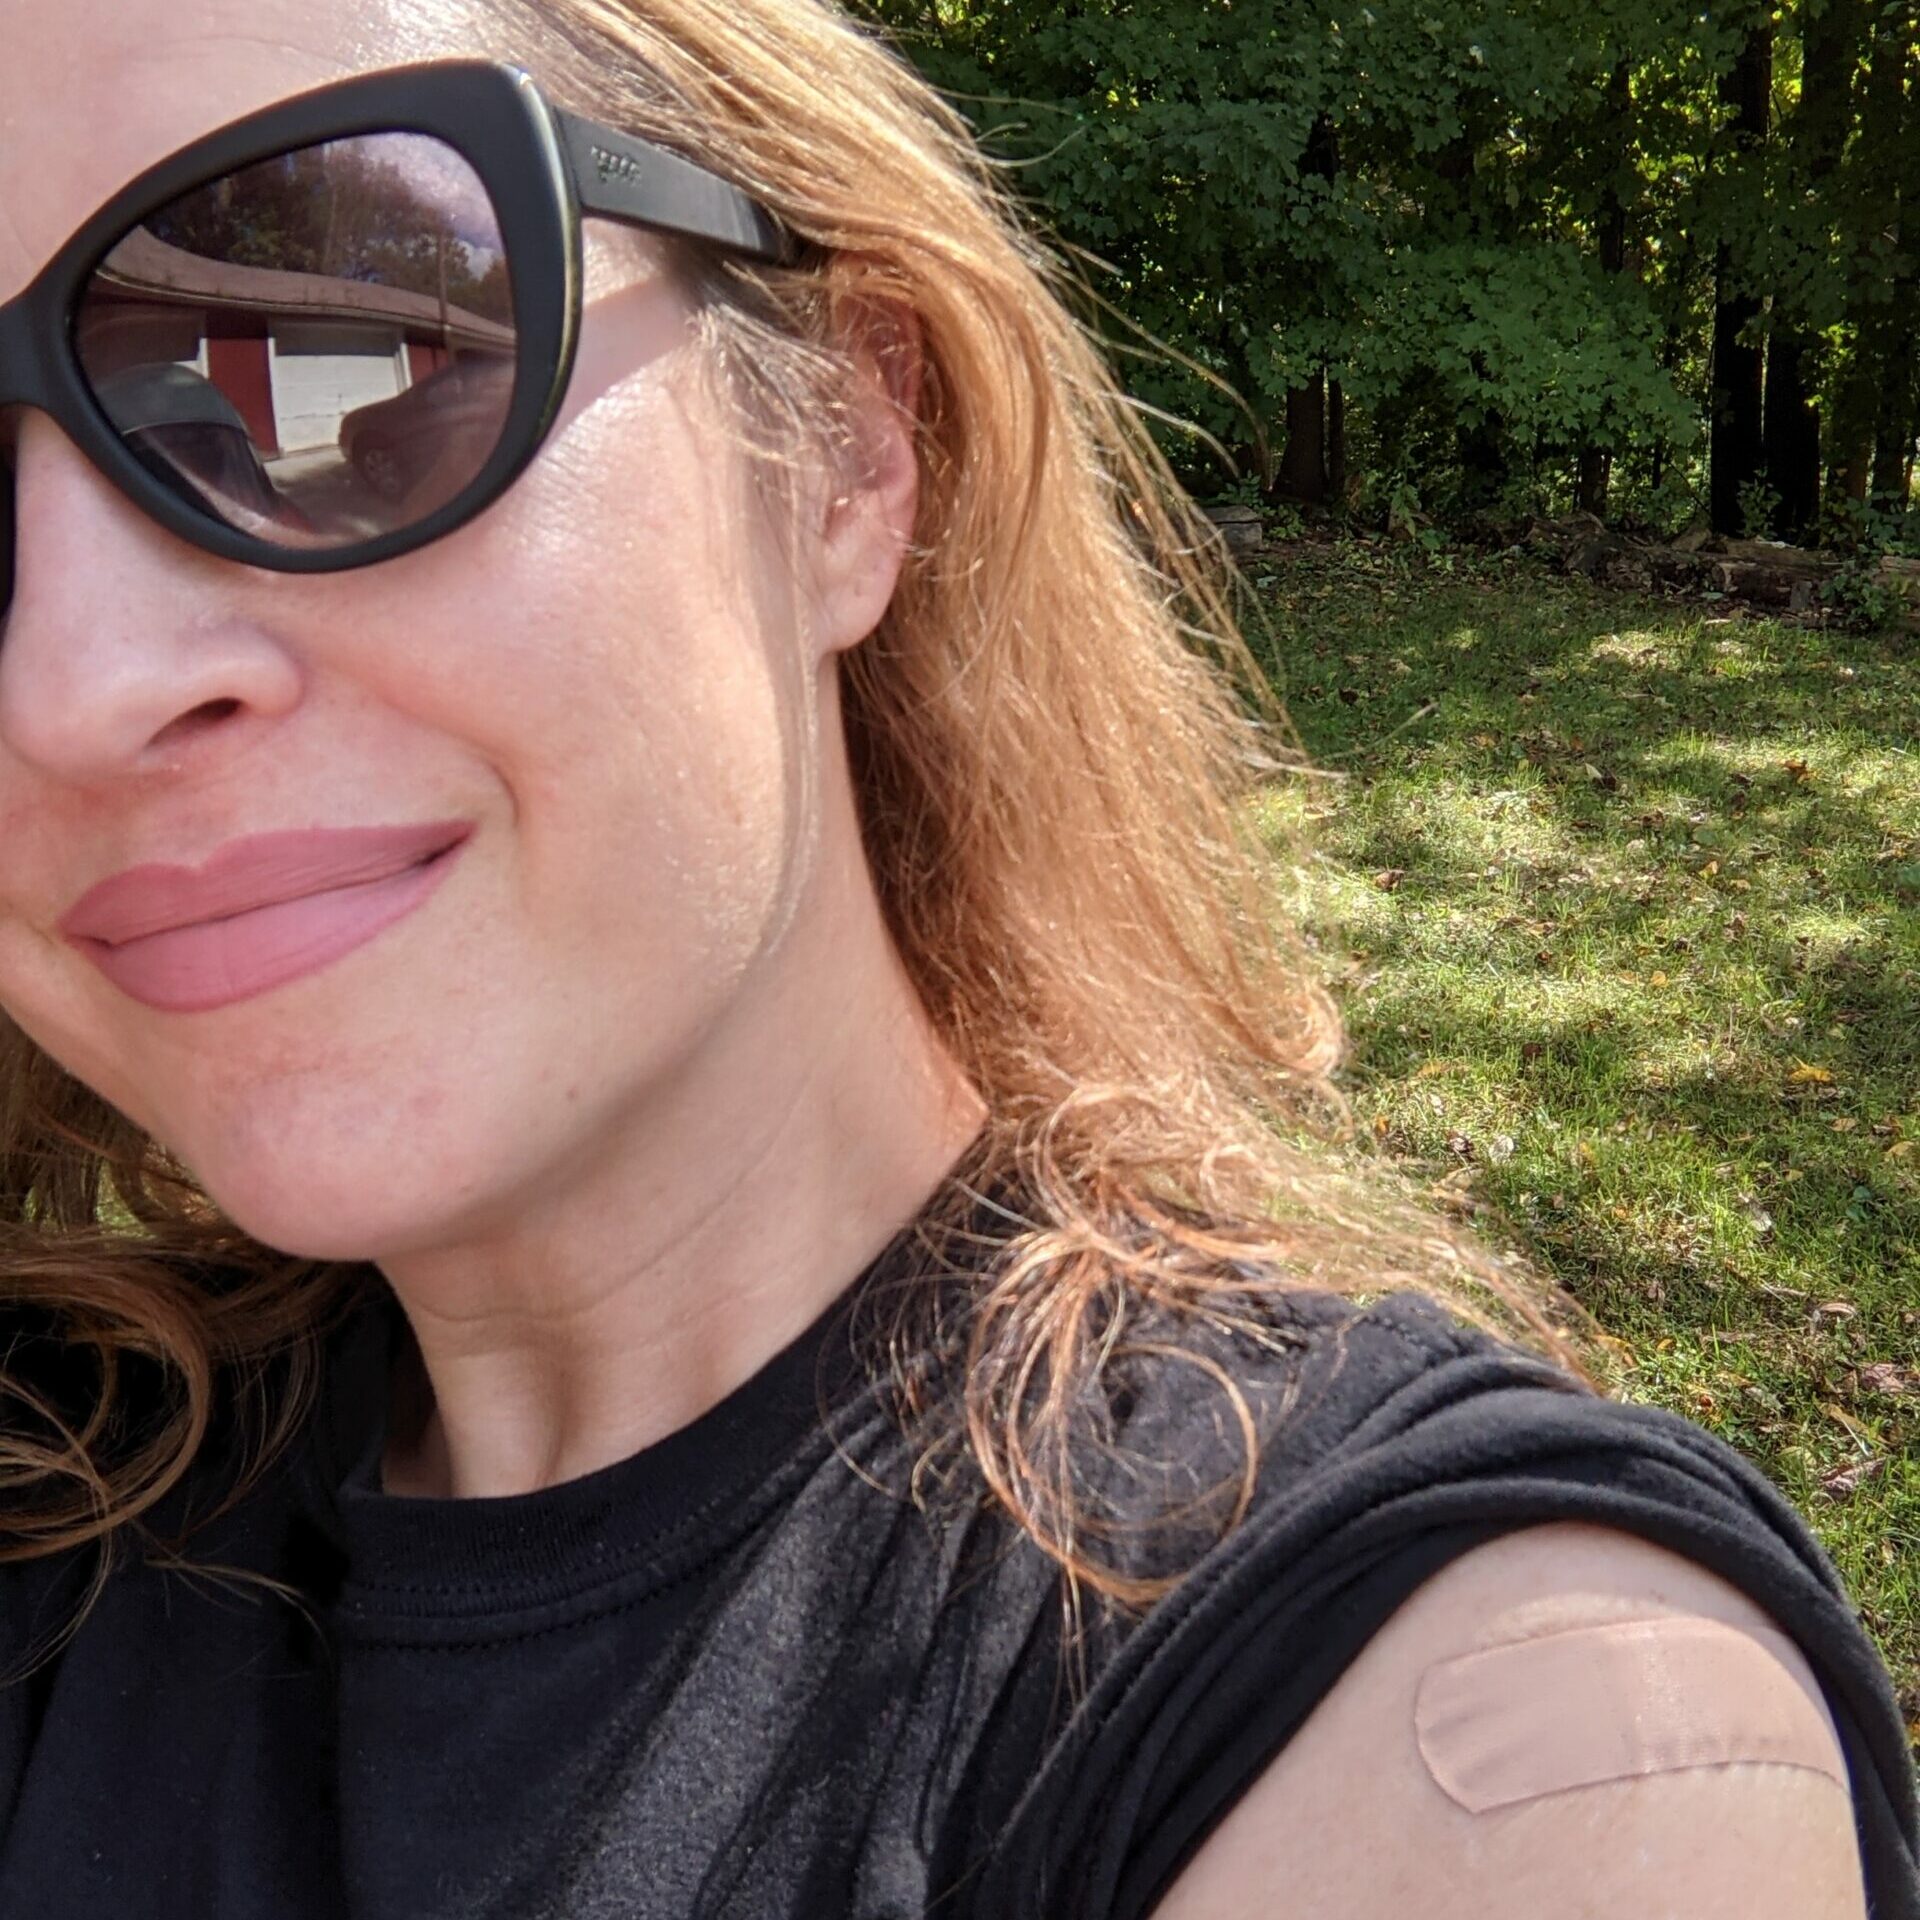 Tara Smith wearing sunglasses and black shirt with a bandaid on her arm.